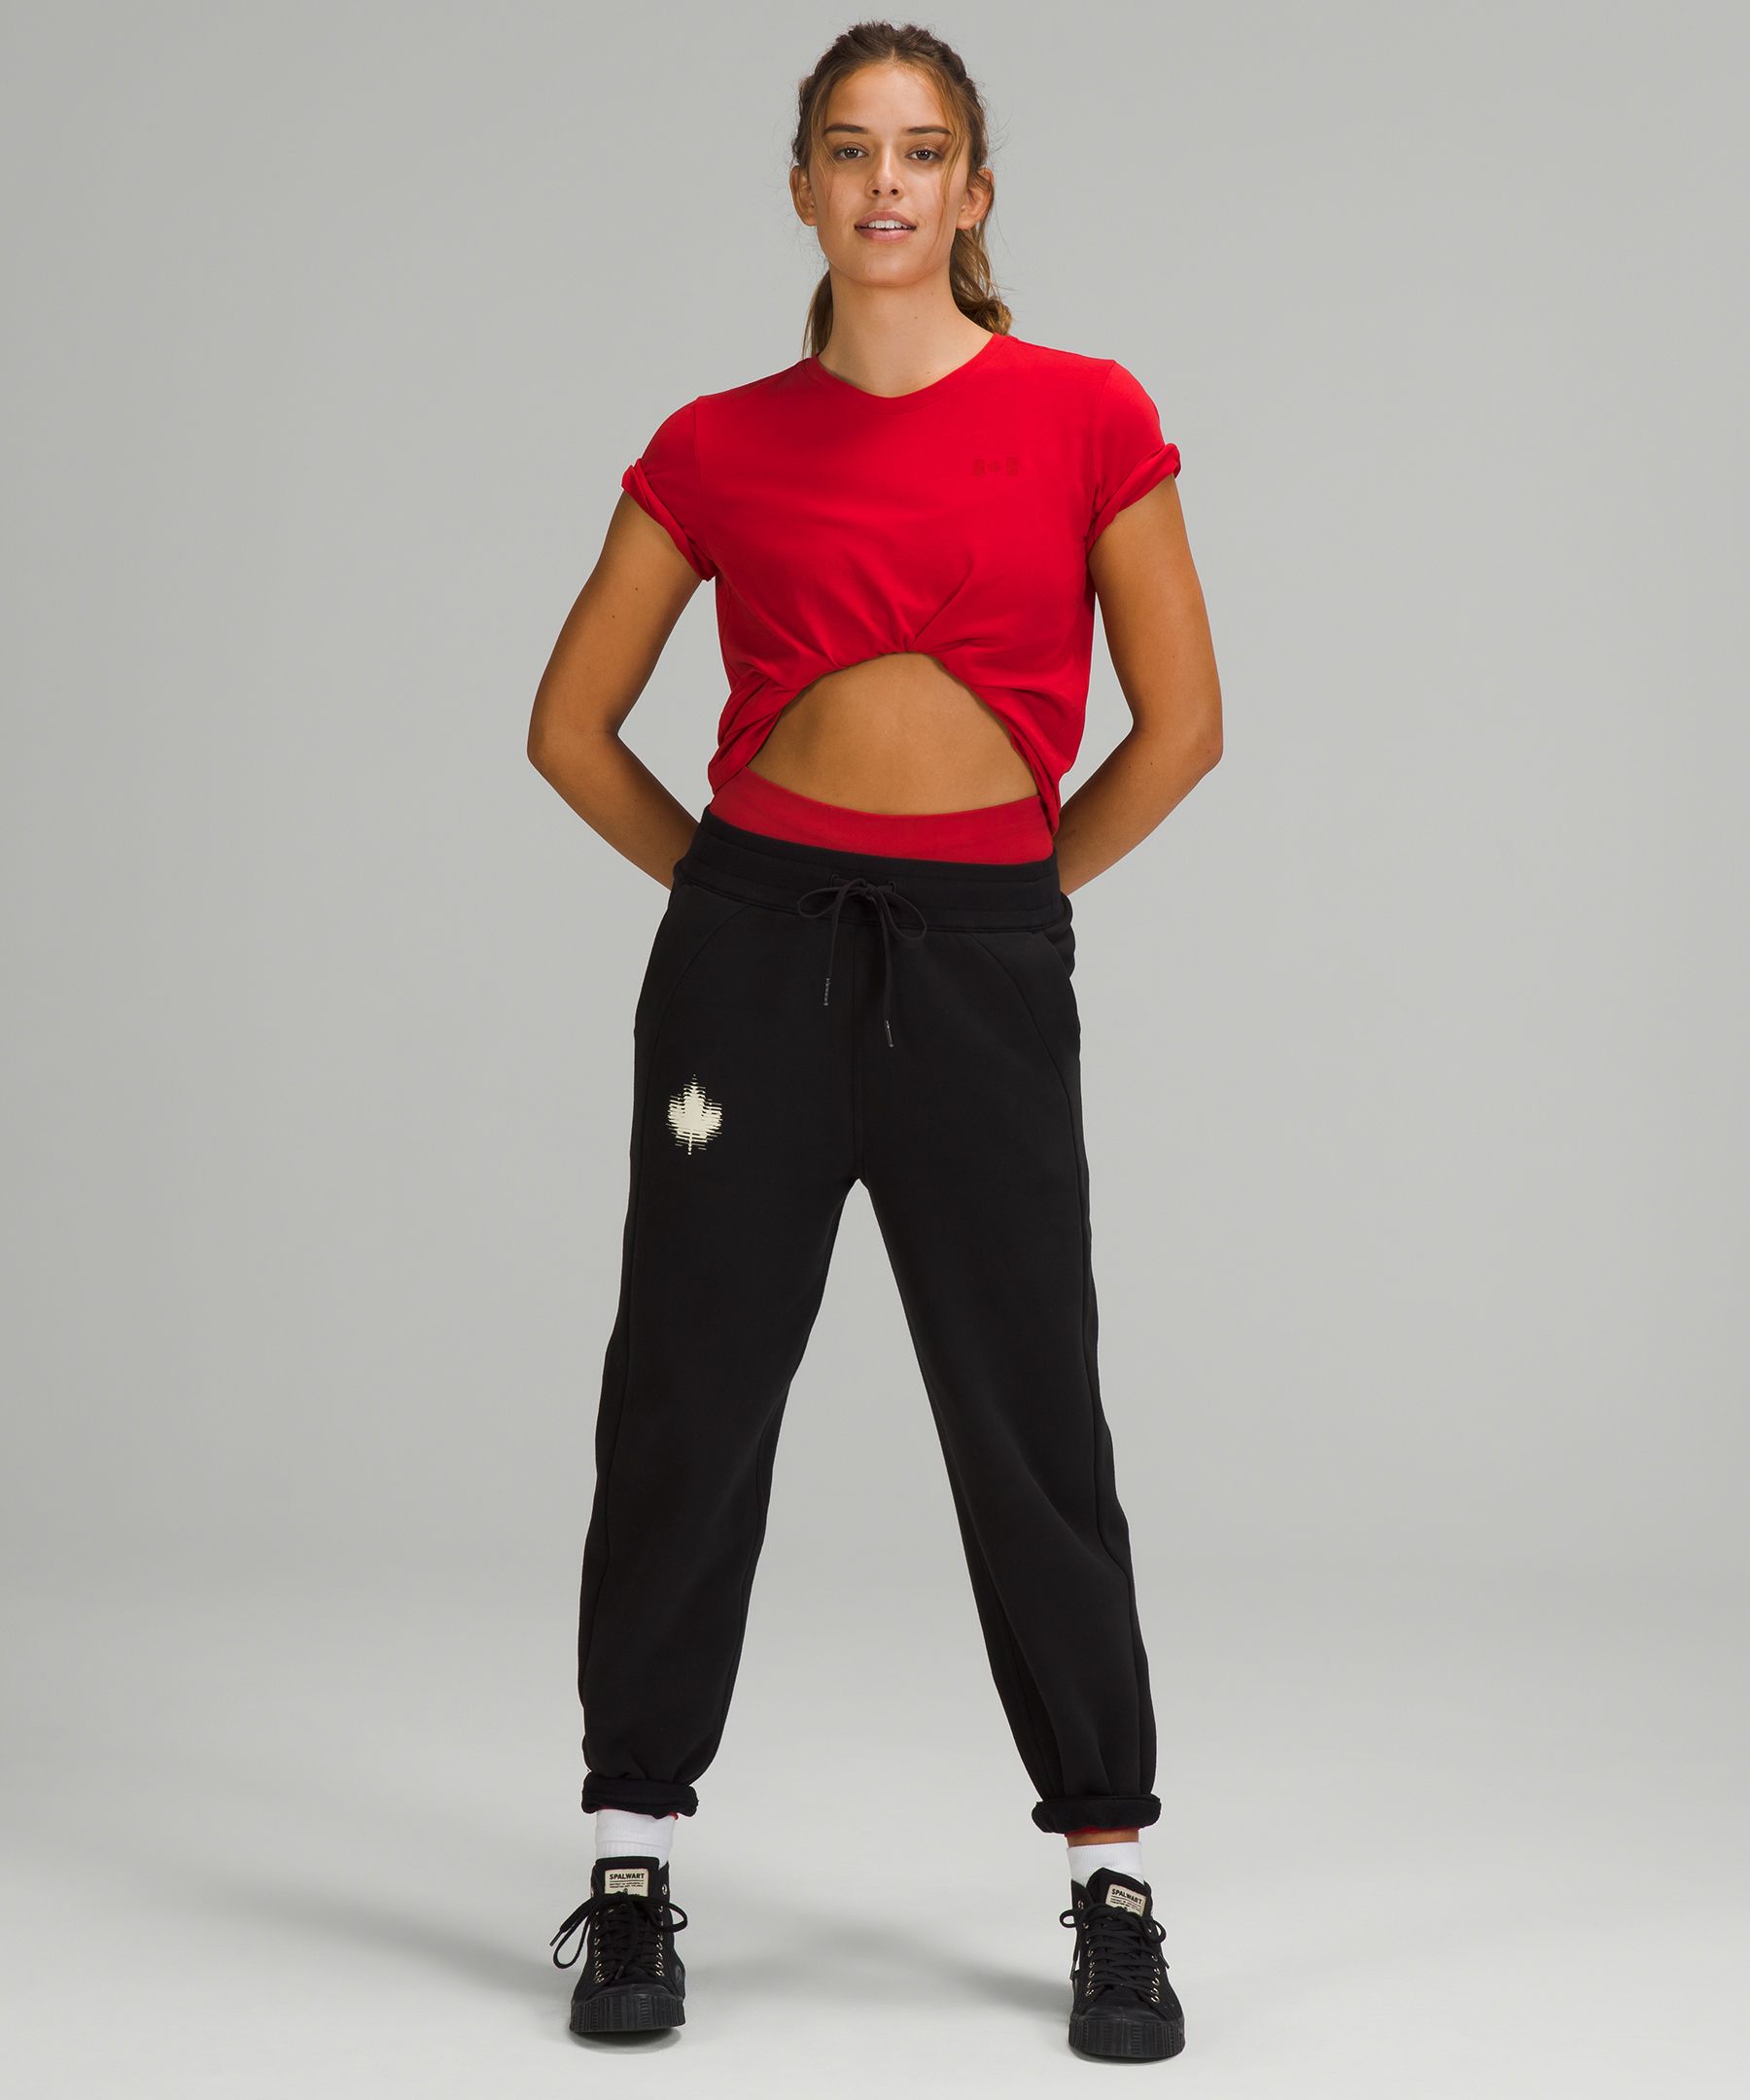 Everyone Hated On Lululemon's Team Canada Olympic Gear But TBH, Some Of  It's Super Cute - Narcity